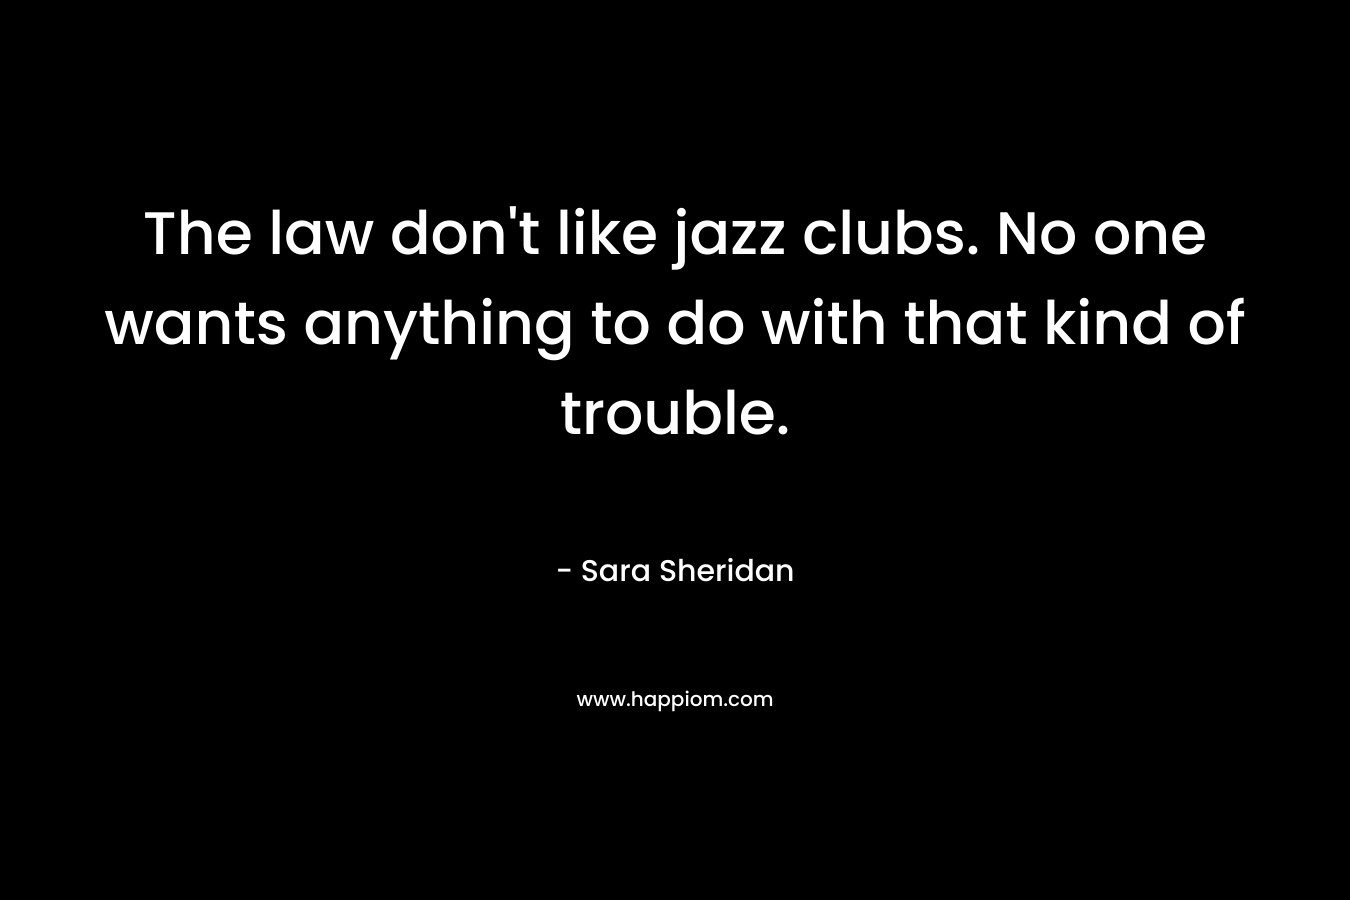 The law don’t like jazz clubs. No one wants anything to do with that kind of trouble. – Sara Sheridan